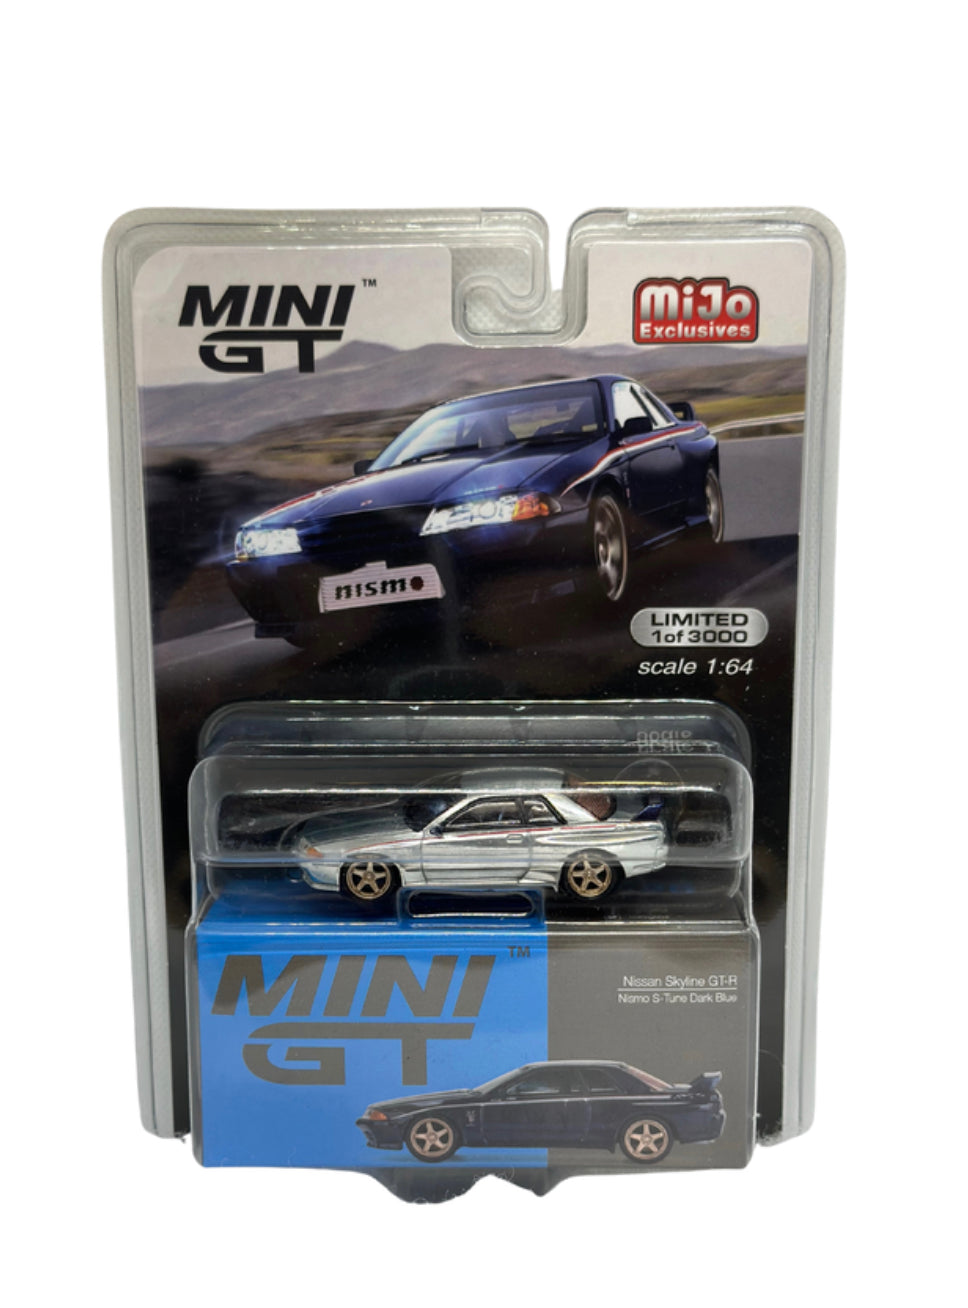 1:64 MINI GT NISSAN SKYLINE GT-R (R32) NISMO S-TUNE "CHASE" *RARE SPECIAL EDITION* (CHROME COLOR)